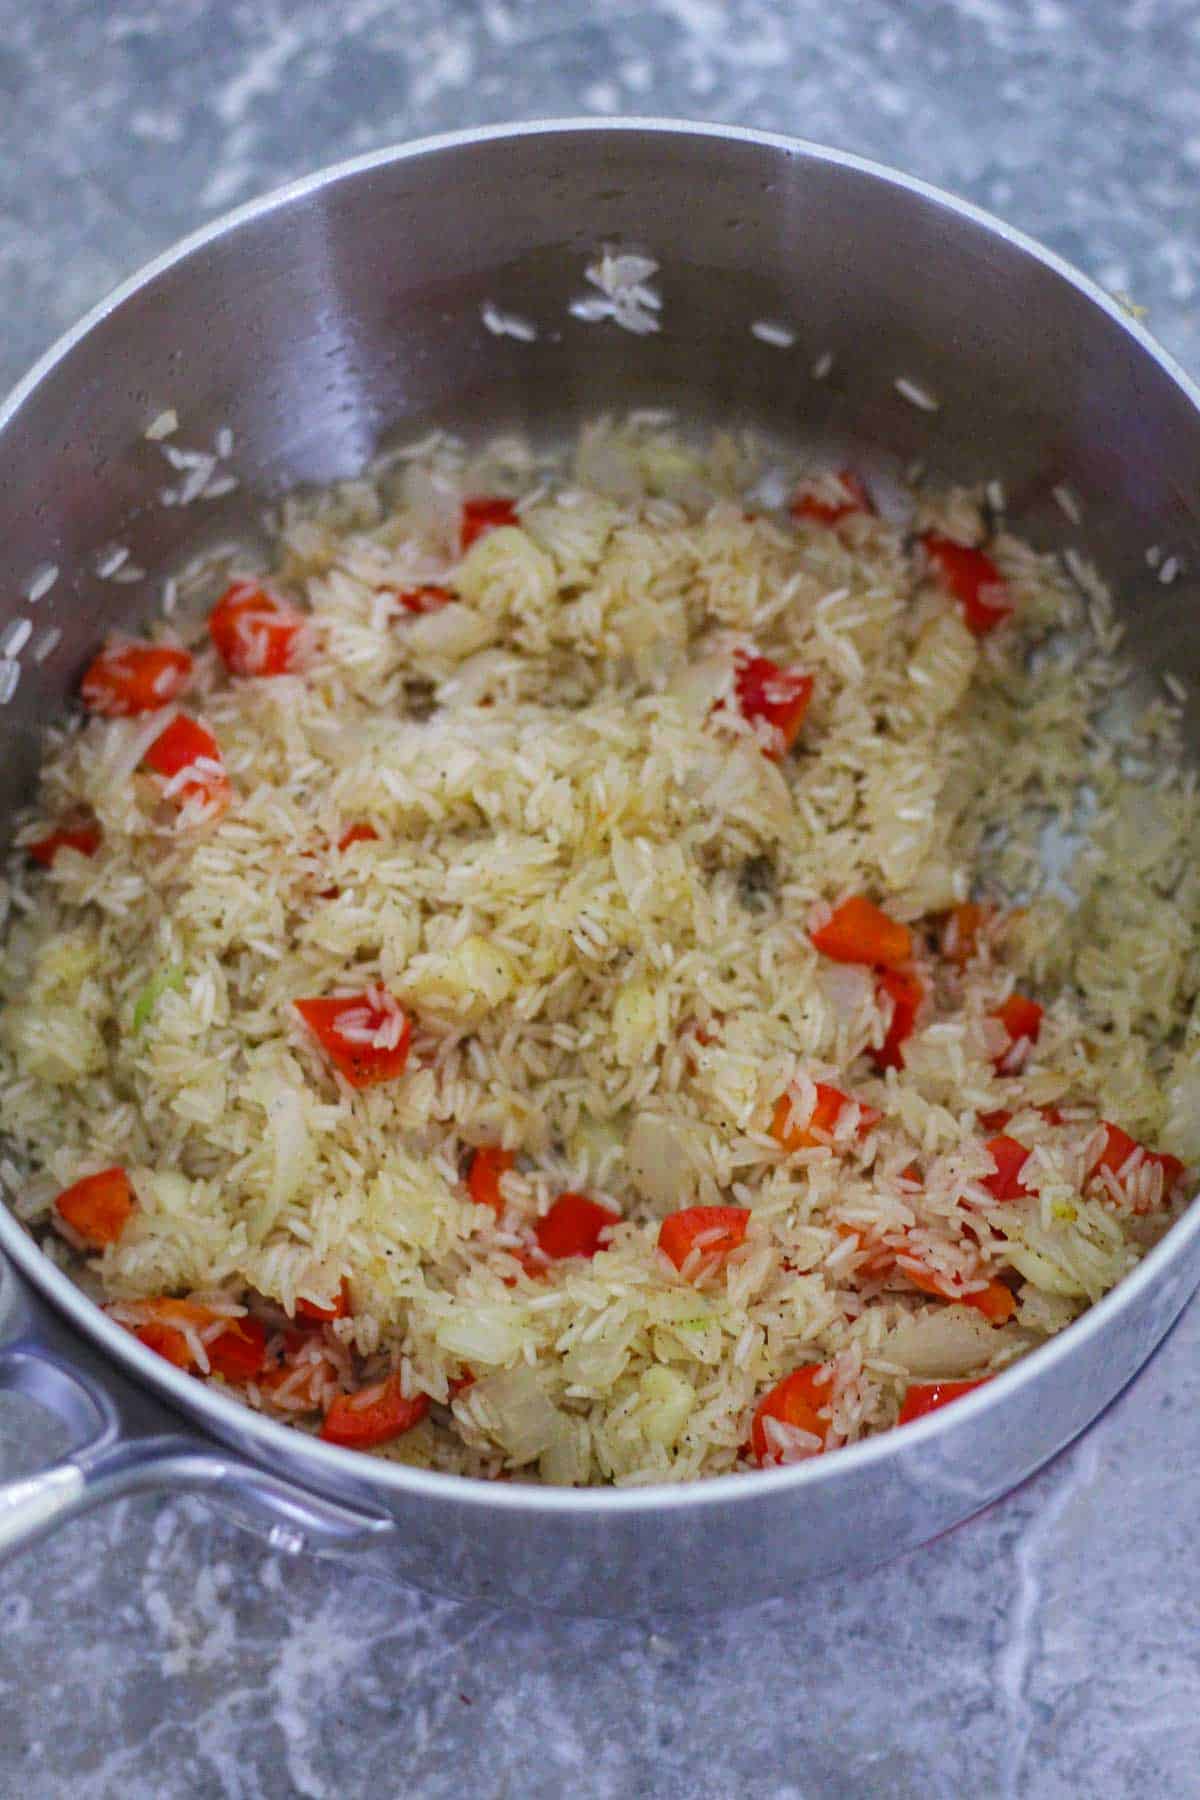 Toasting jasmine rice with the onion, garlic and red pepper. 